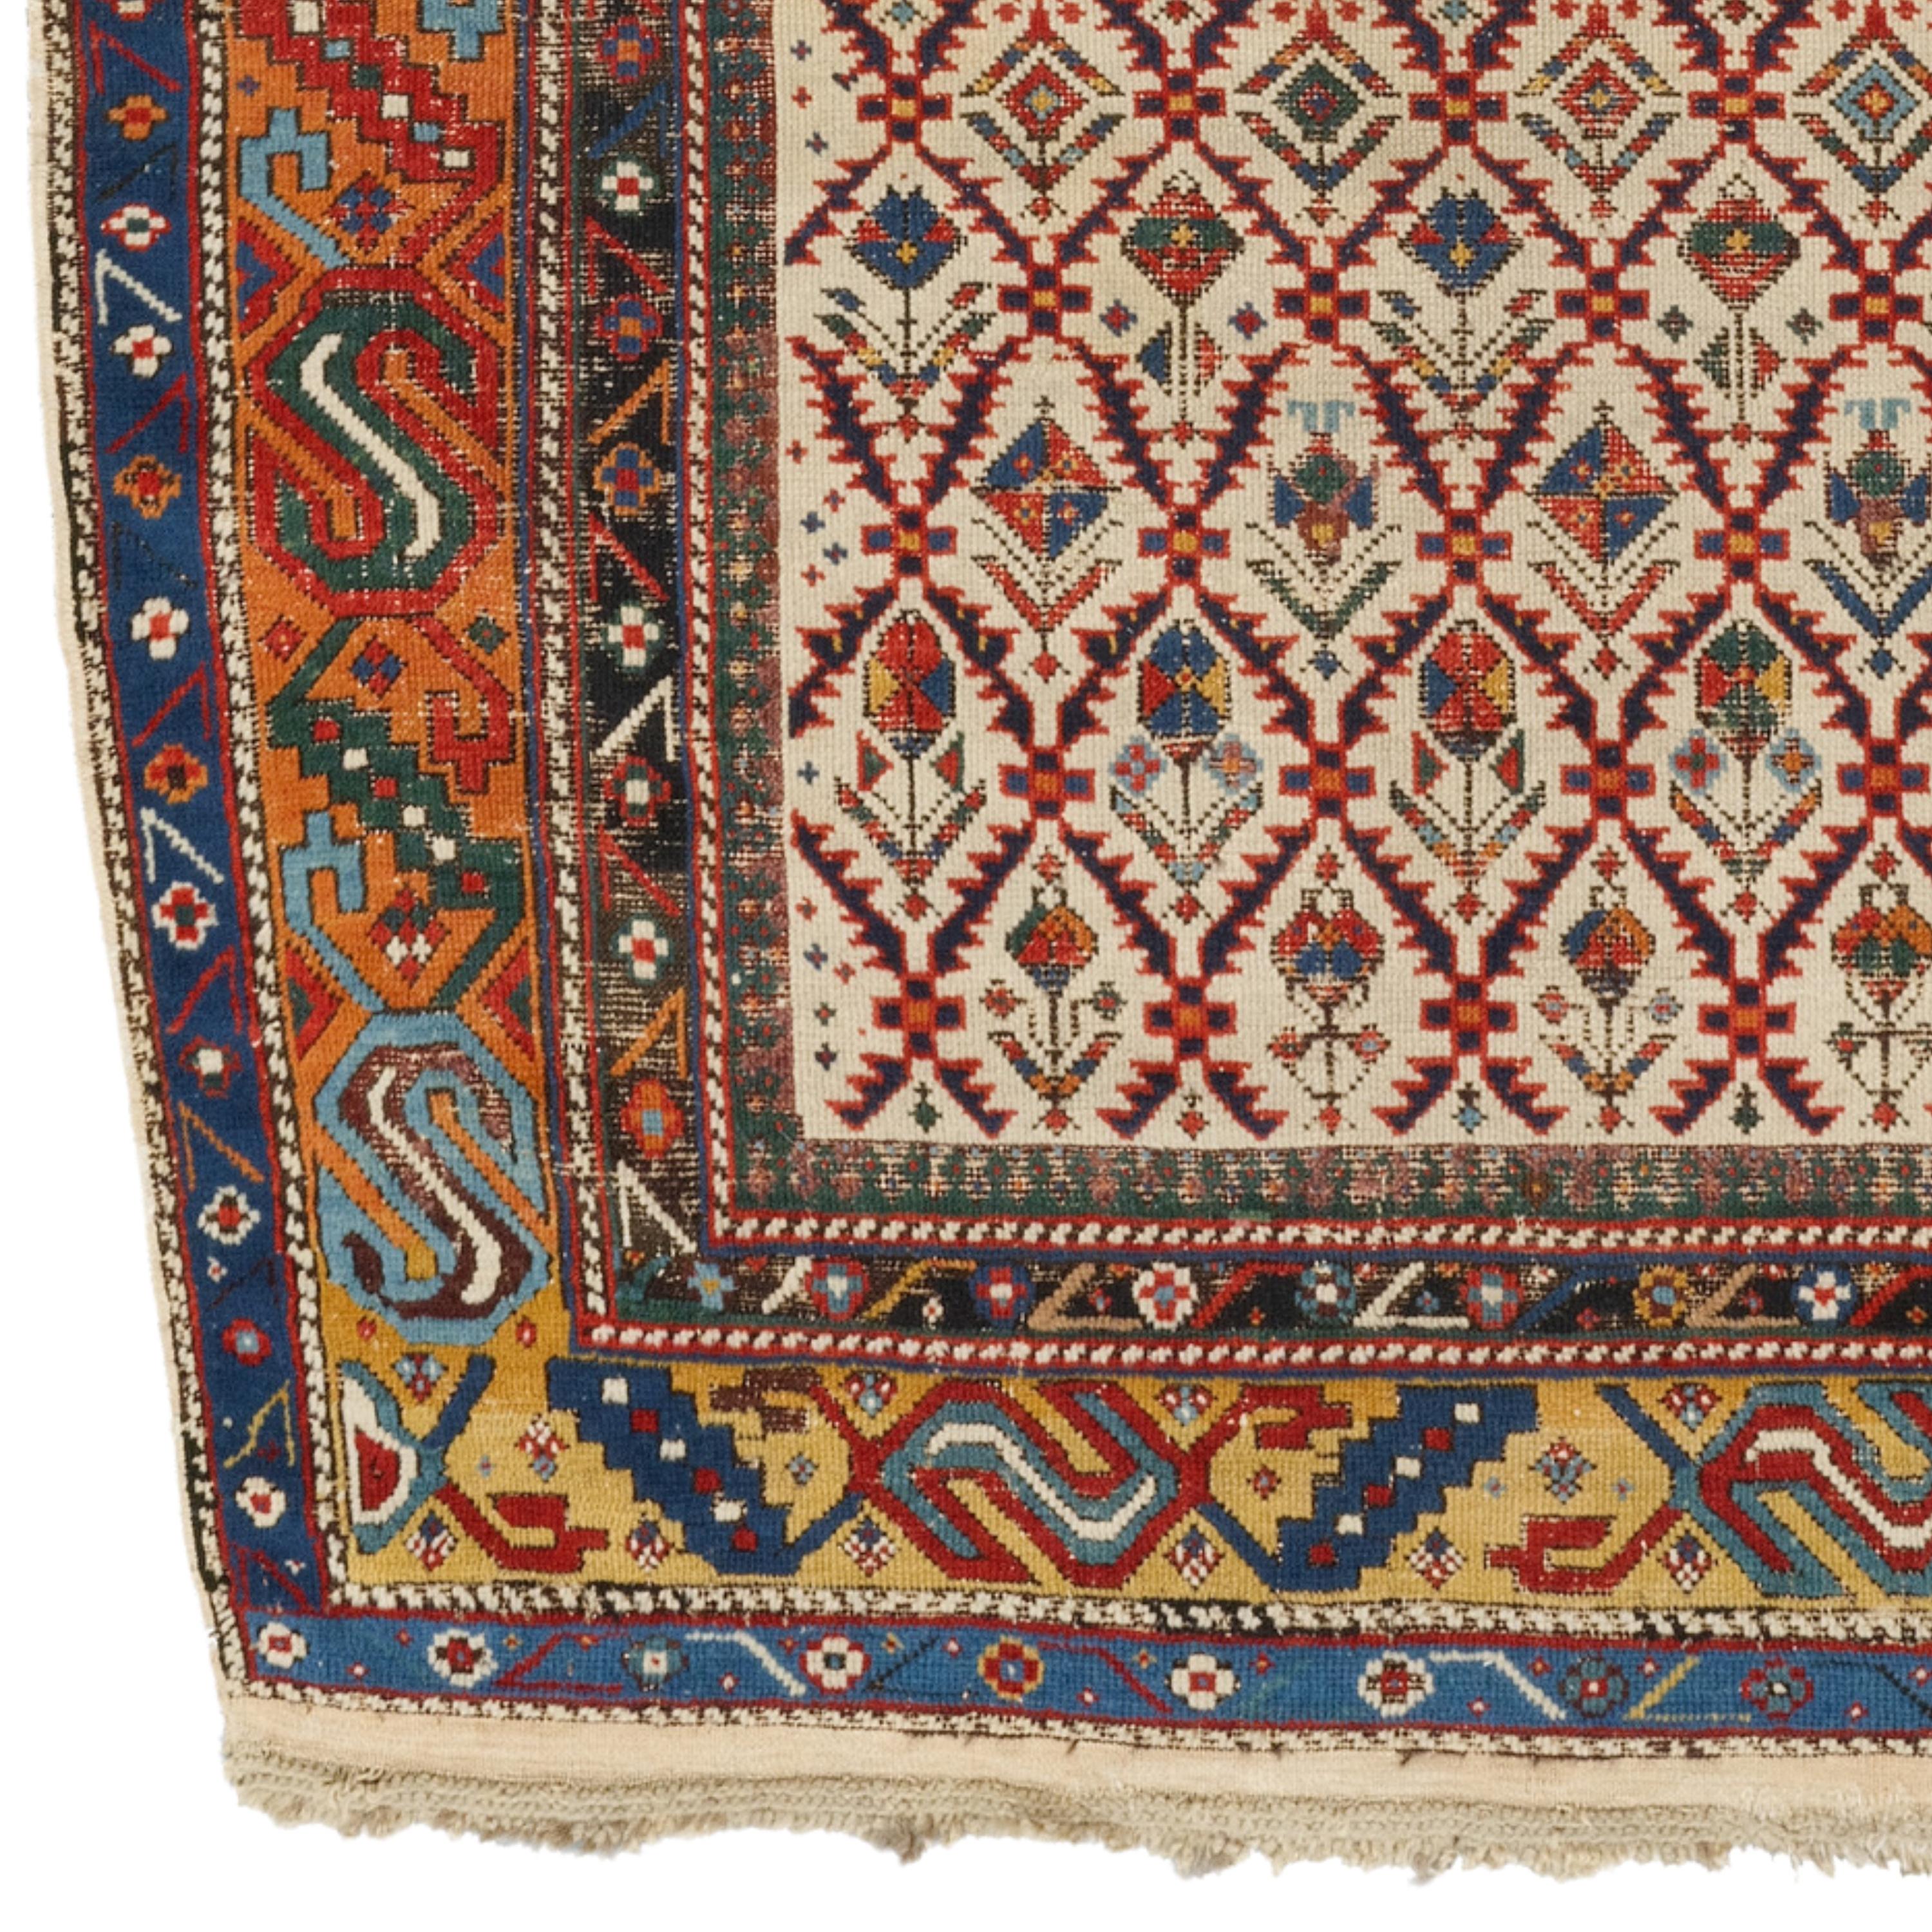 Late of the 19th Century Caucasian Prayer Shirvan Rug
Size : 130 x 167 cm

This impressive late 19th-century Shirvan Carpet is a masterpiece reflecting the elegant and sophisticated craftsmanship of a historic period.

Rich Patterns: The carpet is